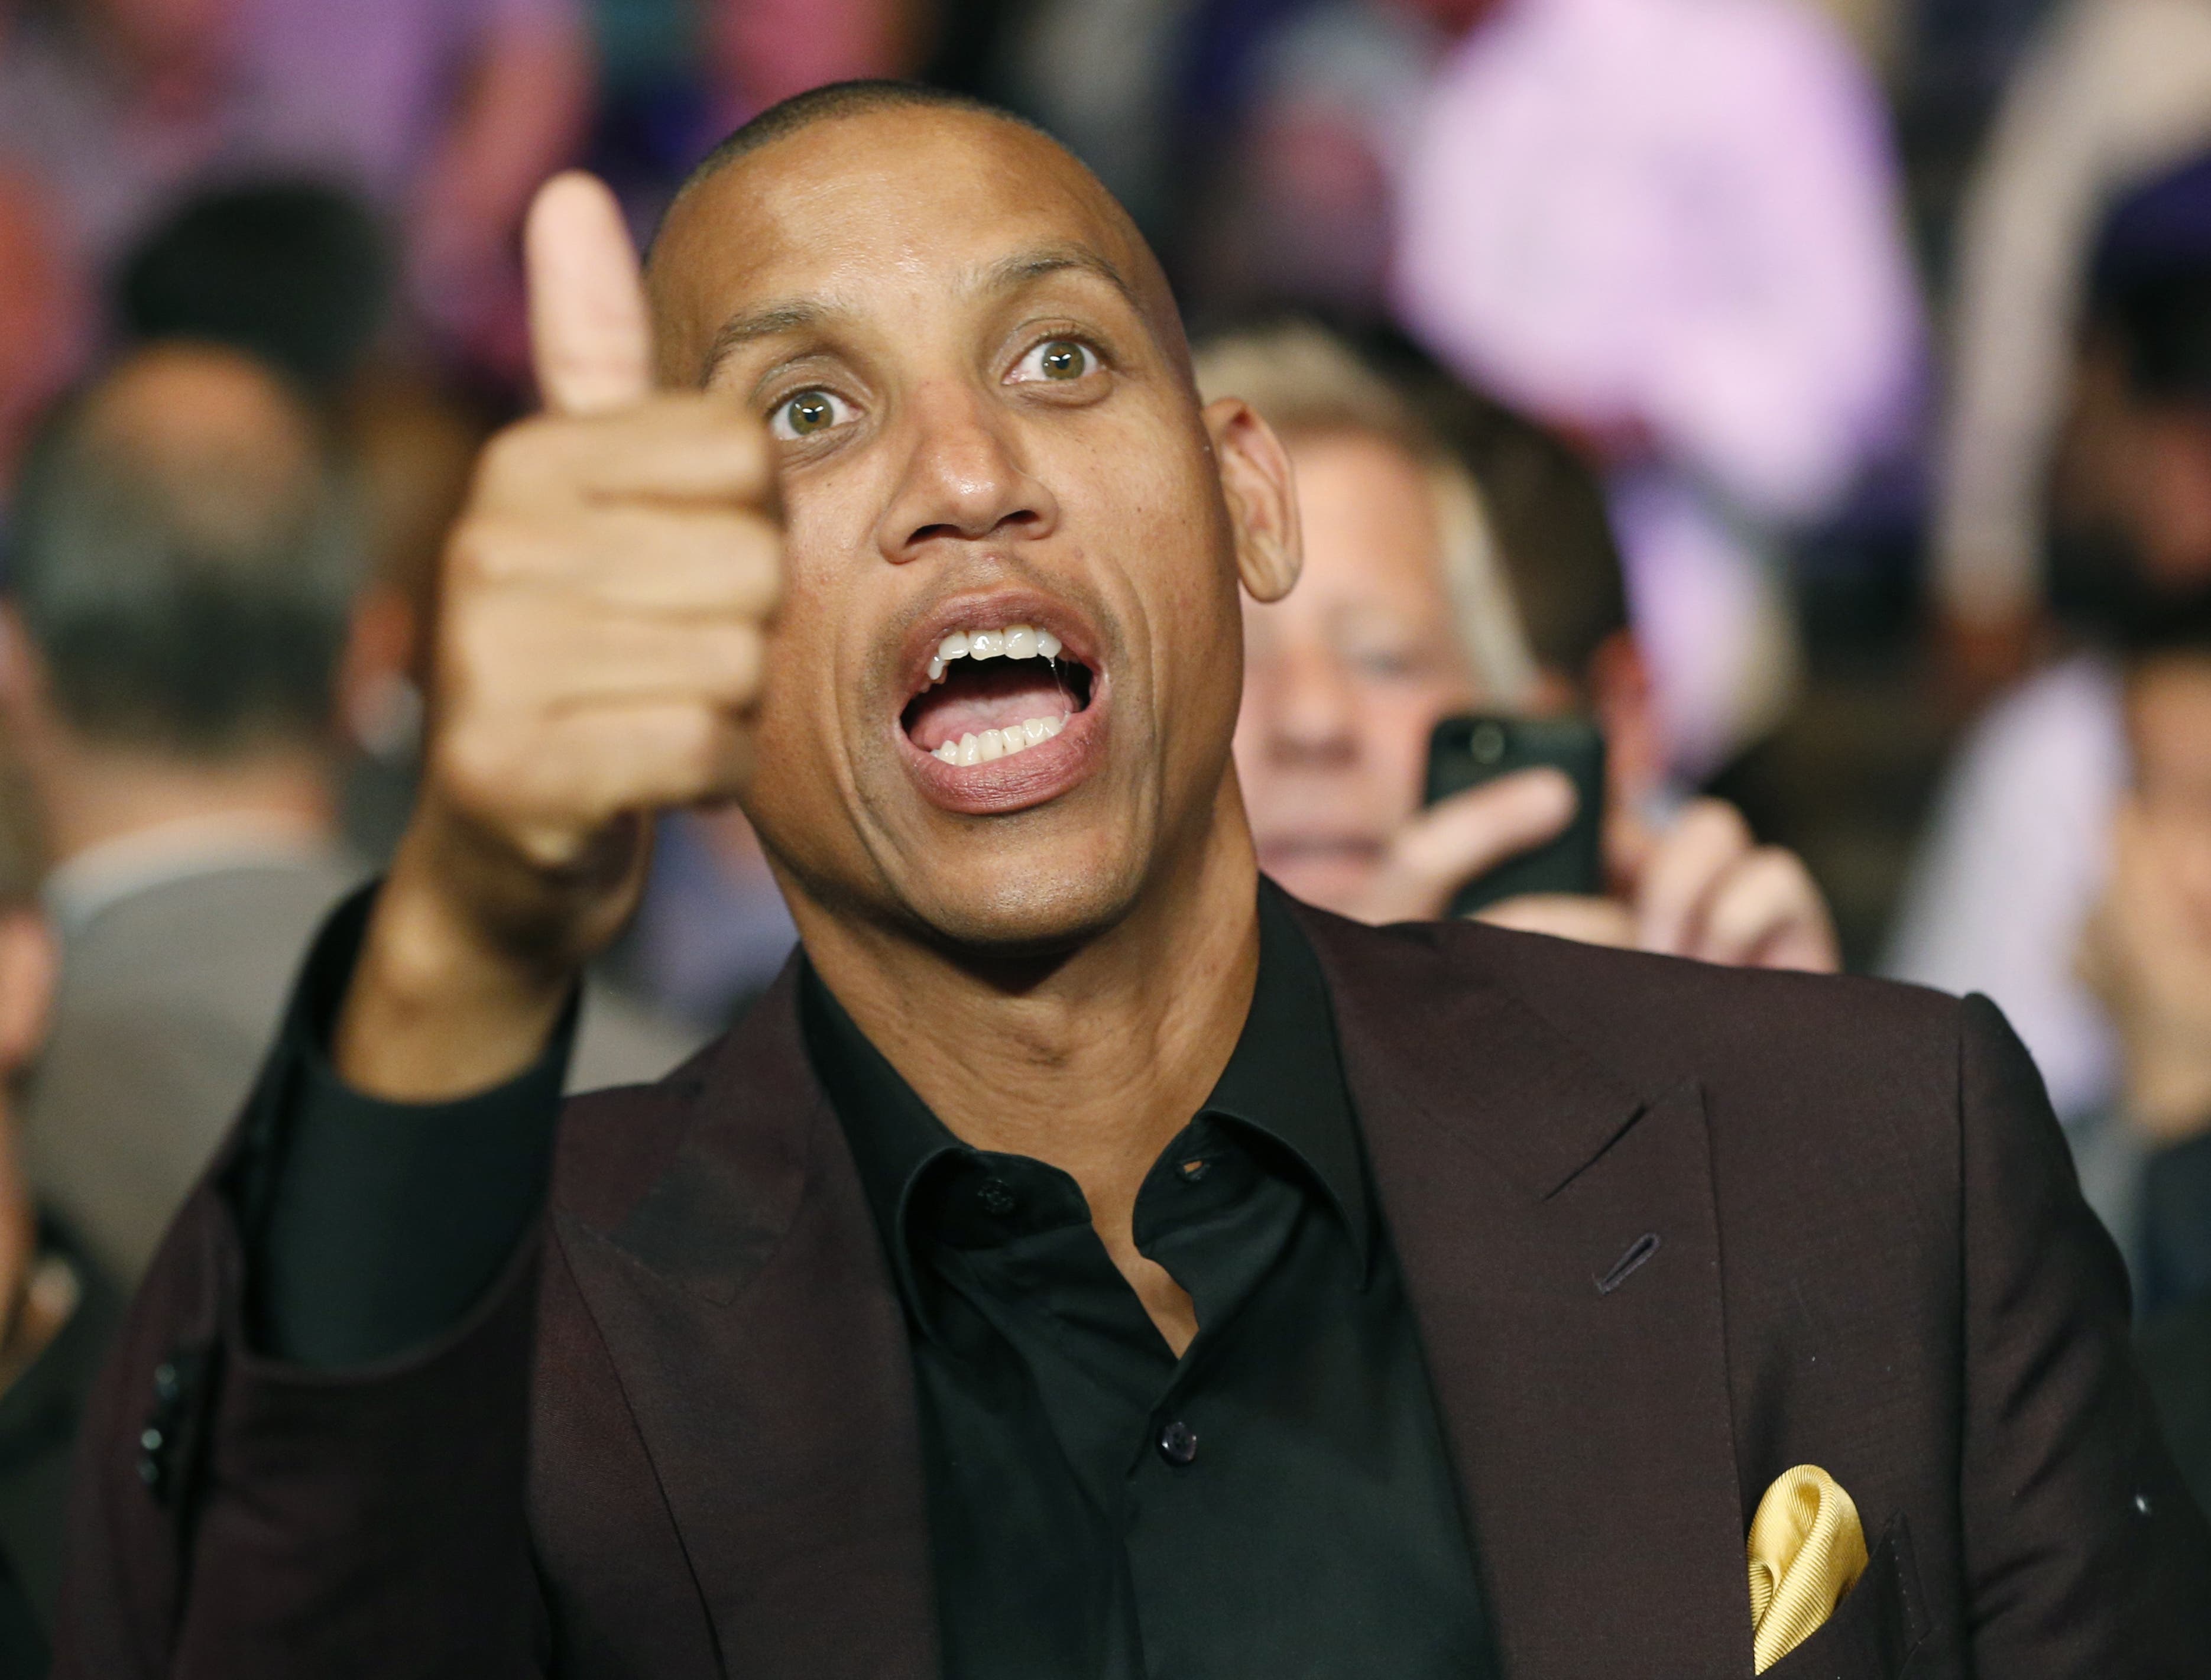 Reggie Miller gestures to the crowd before the start of the world welterweight championship. (AP)